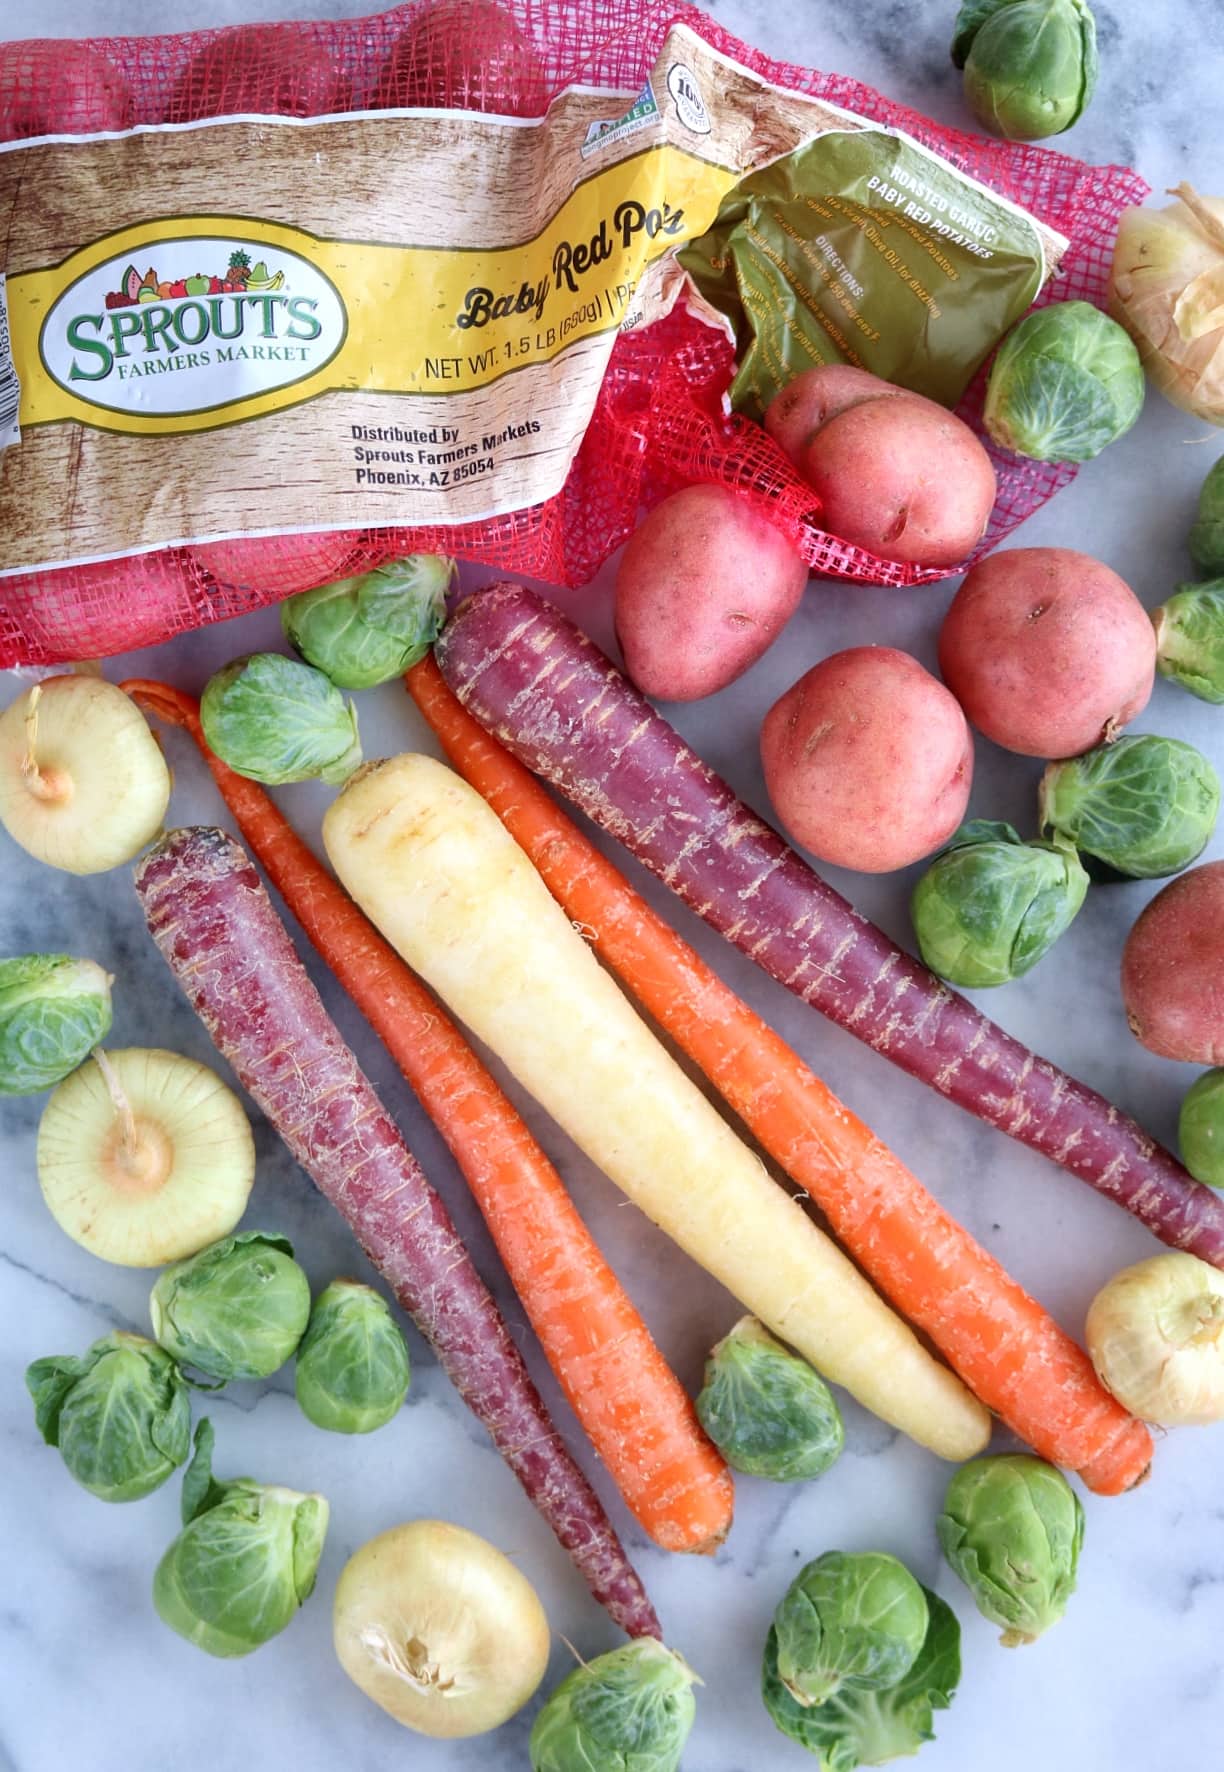 Colorful array of fresh vegetables from Sprouts Farmers Market